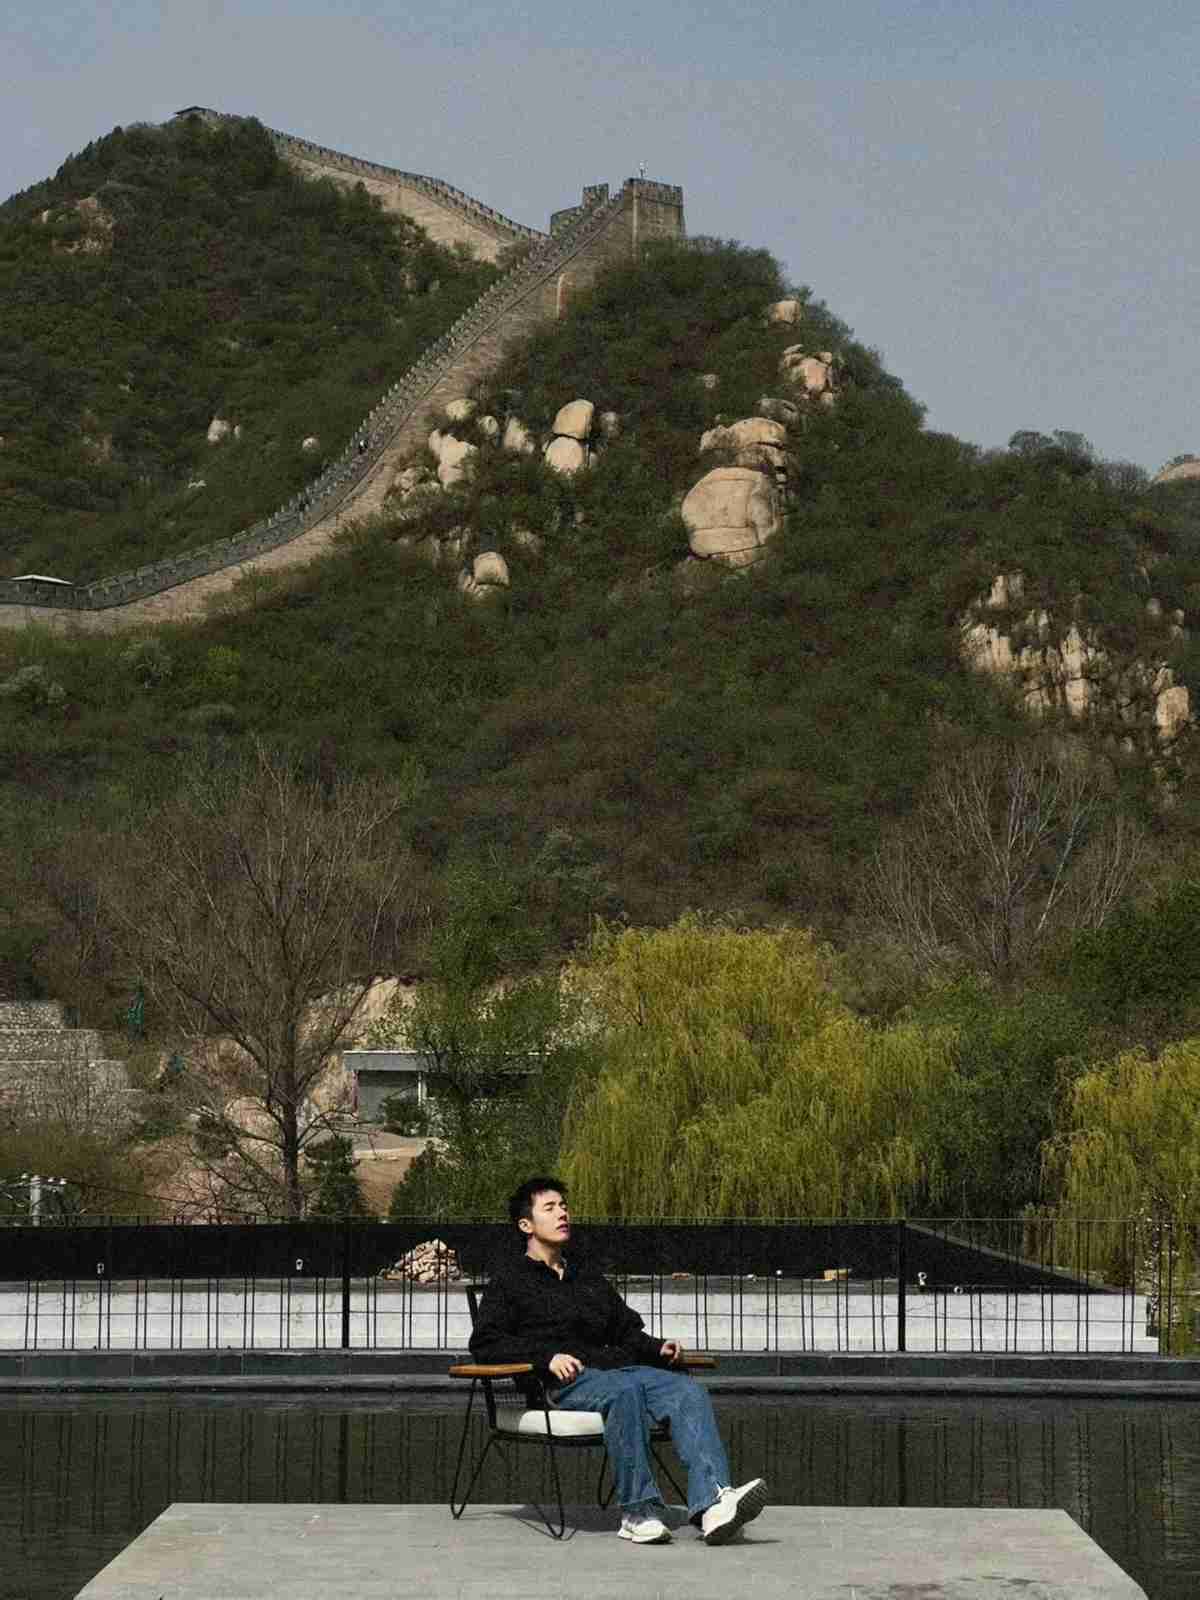 Stay at the foot of the Great Wall